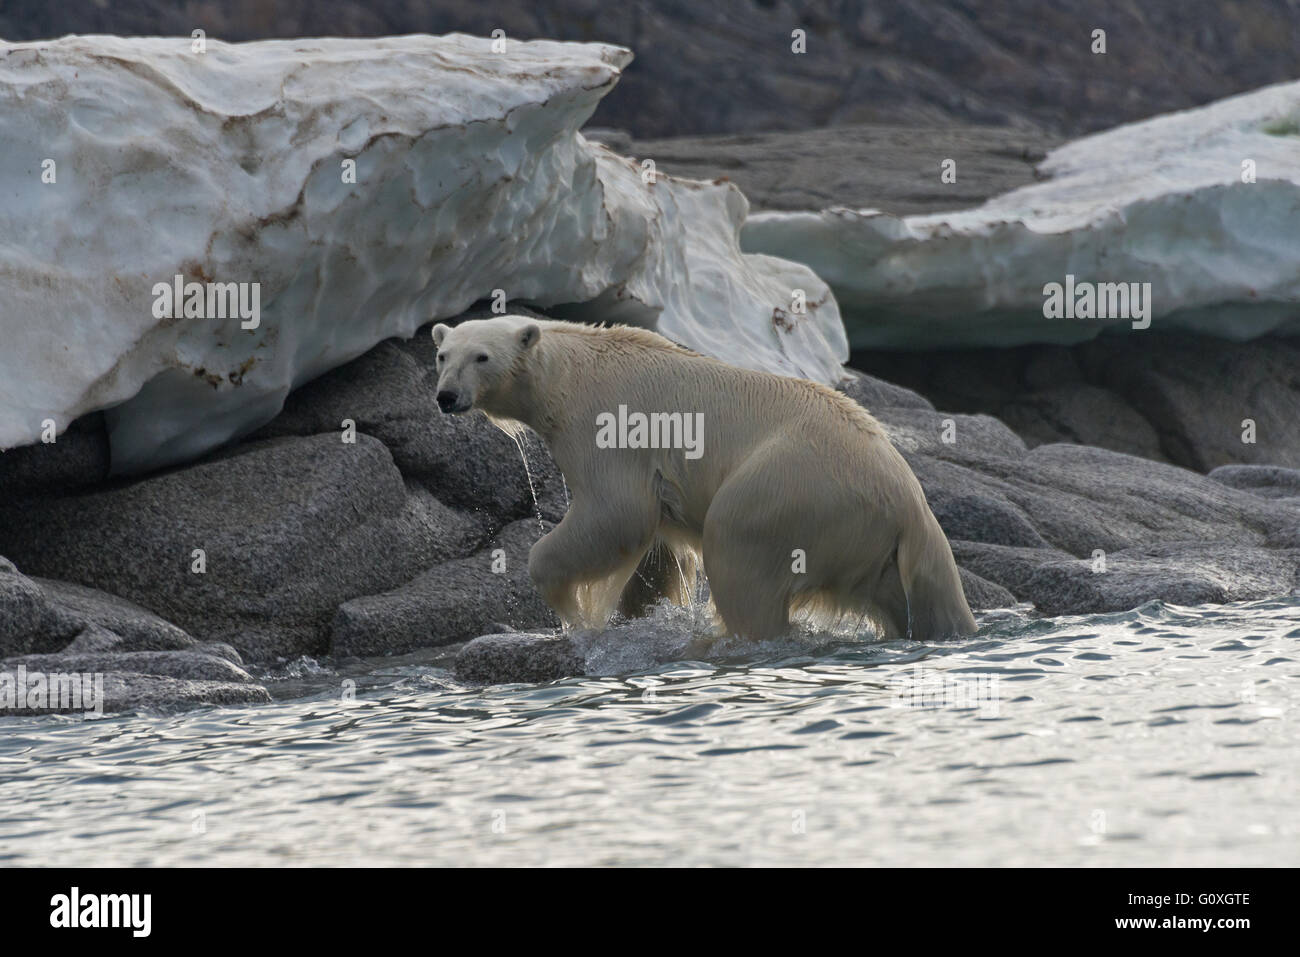 One polar bear dripping wet as it climbs out of the water at Chermsideoya on Nordaustlandet, Svalbard Stock Photo